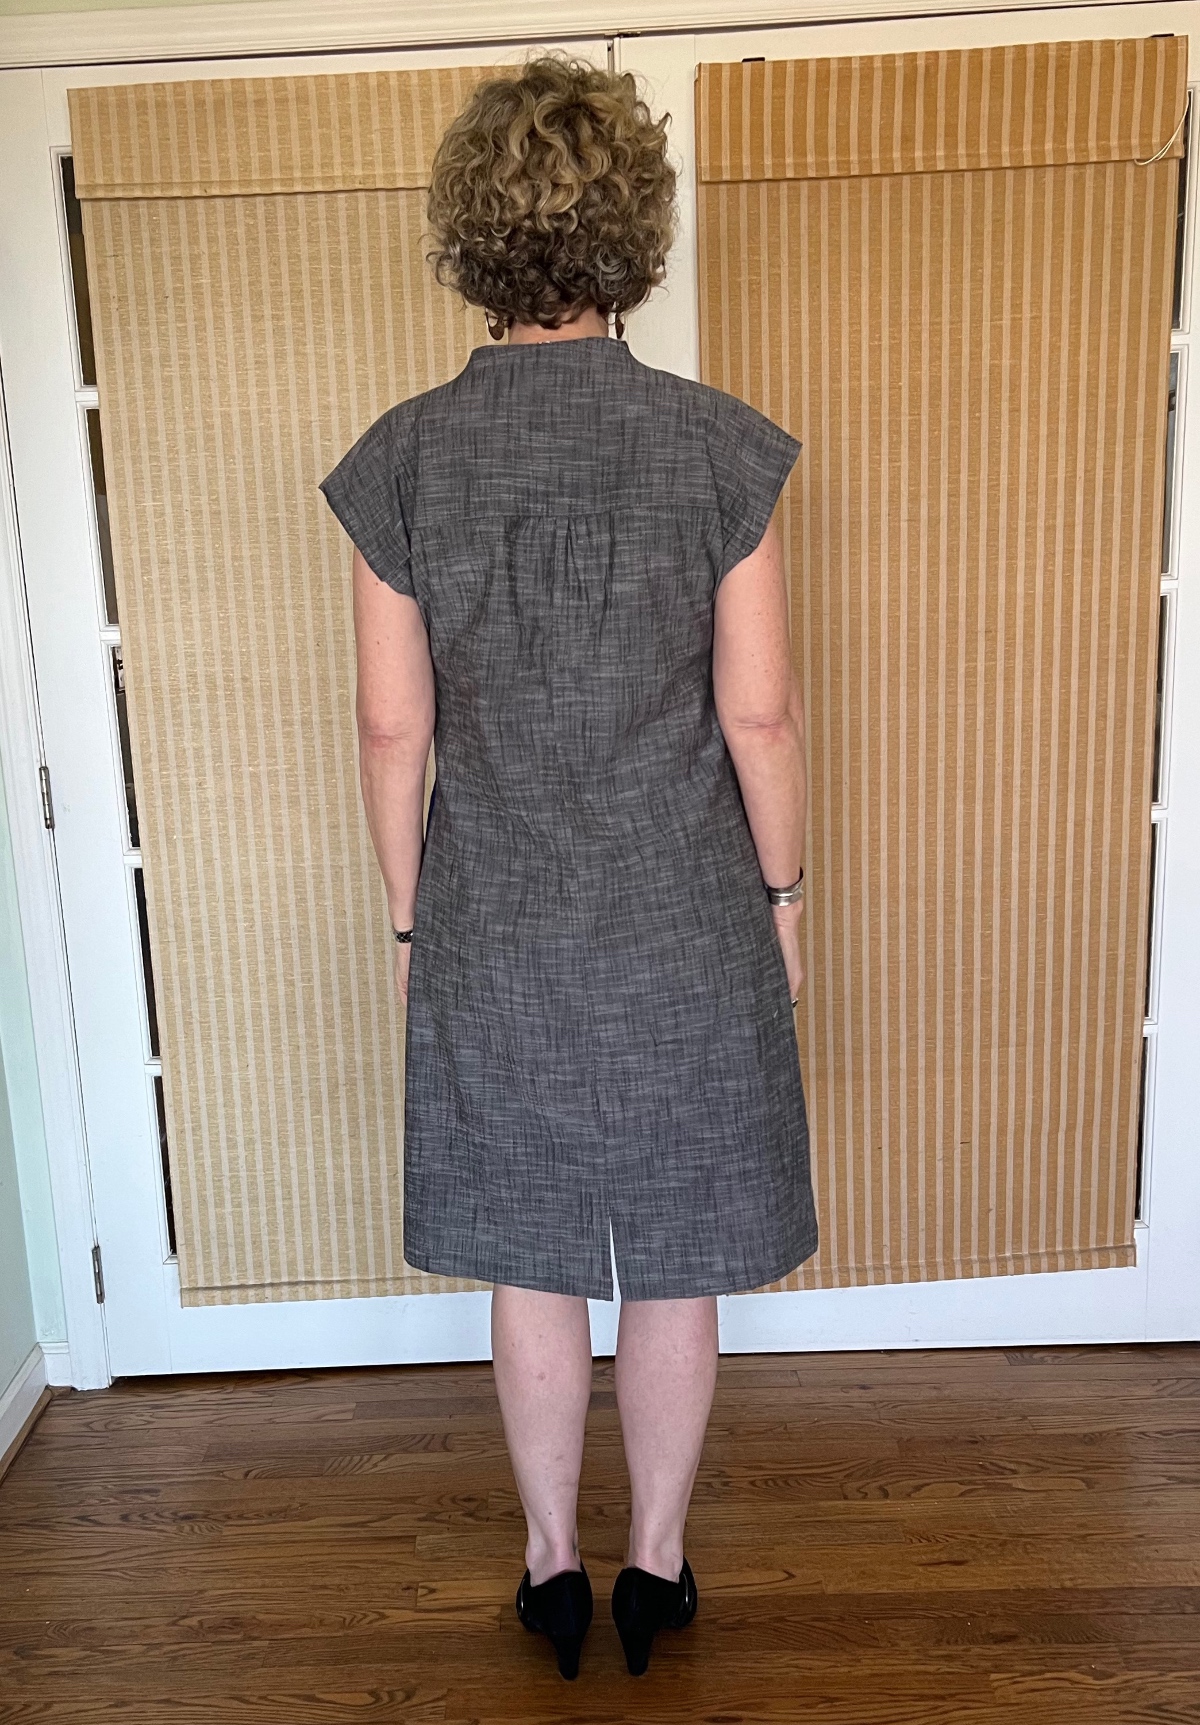 How to color-block a dress sewing pattern.